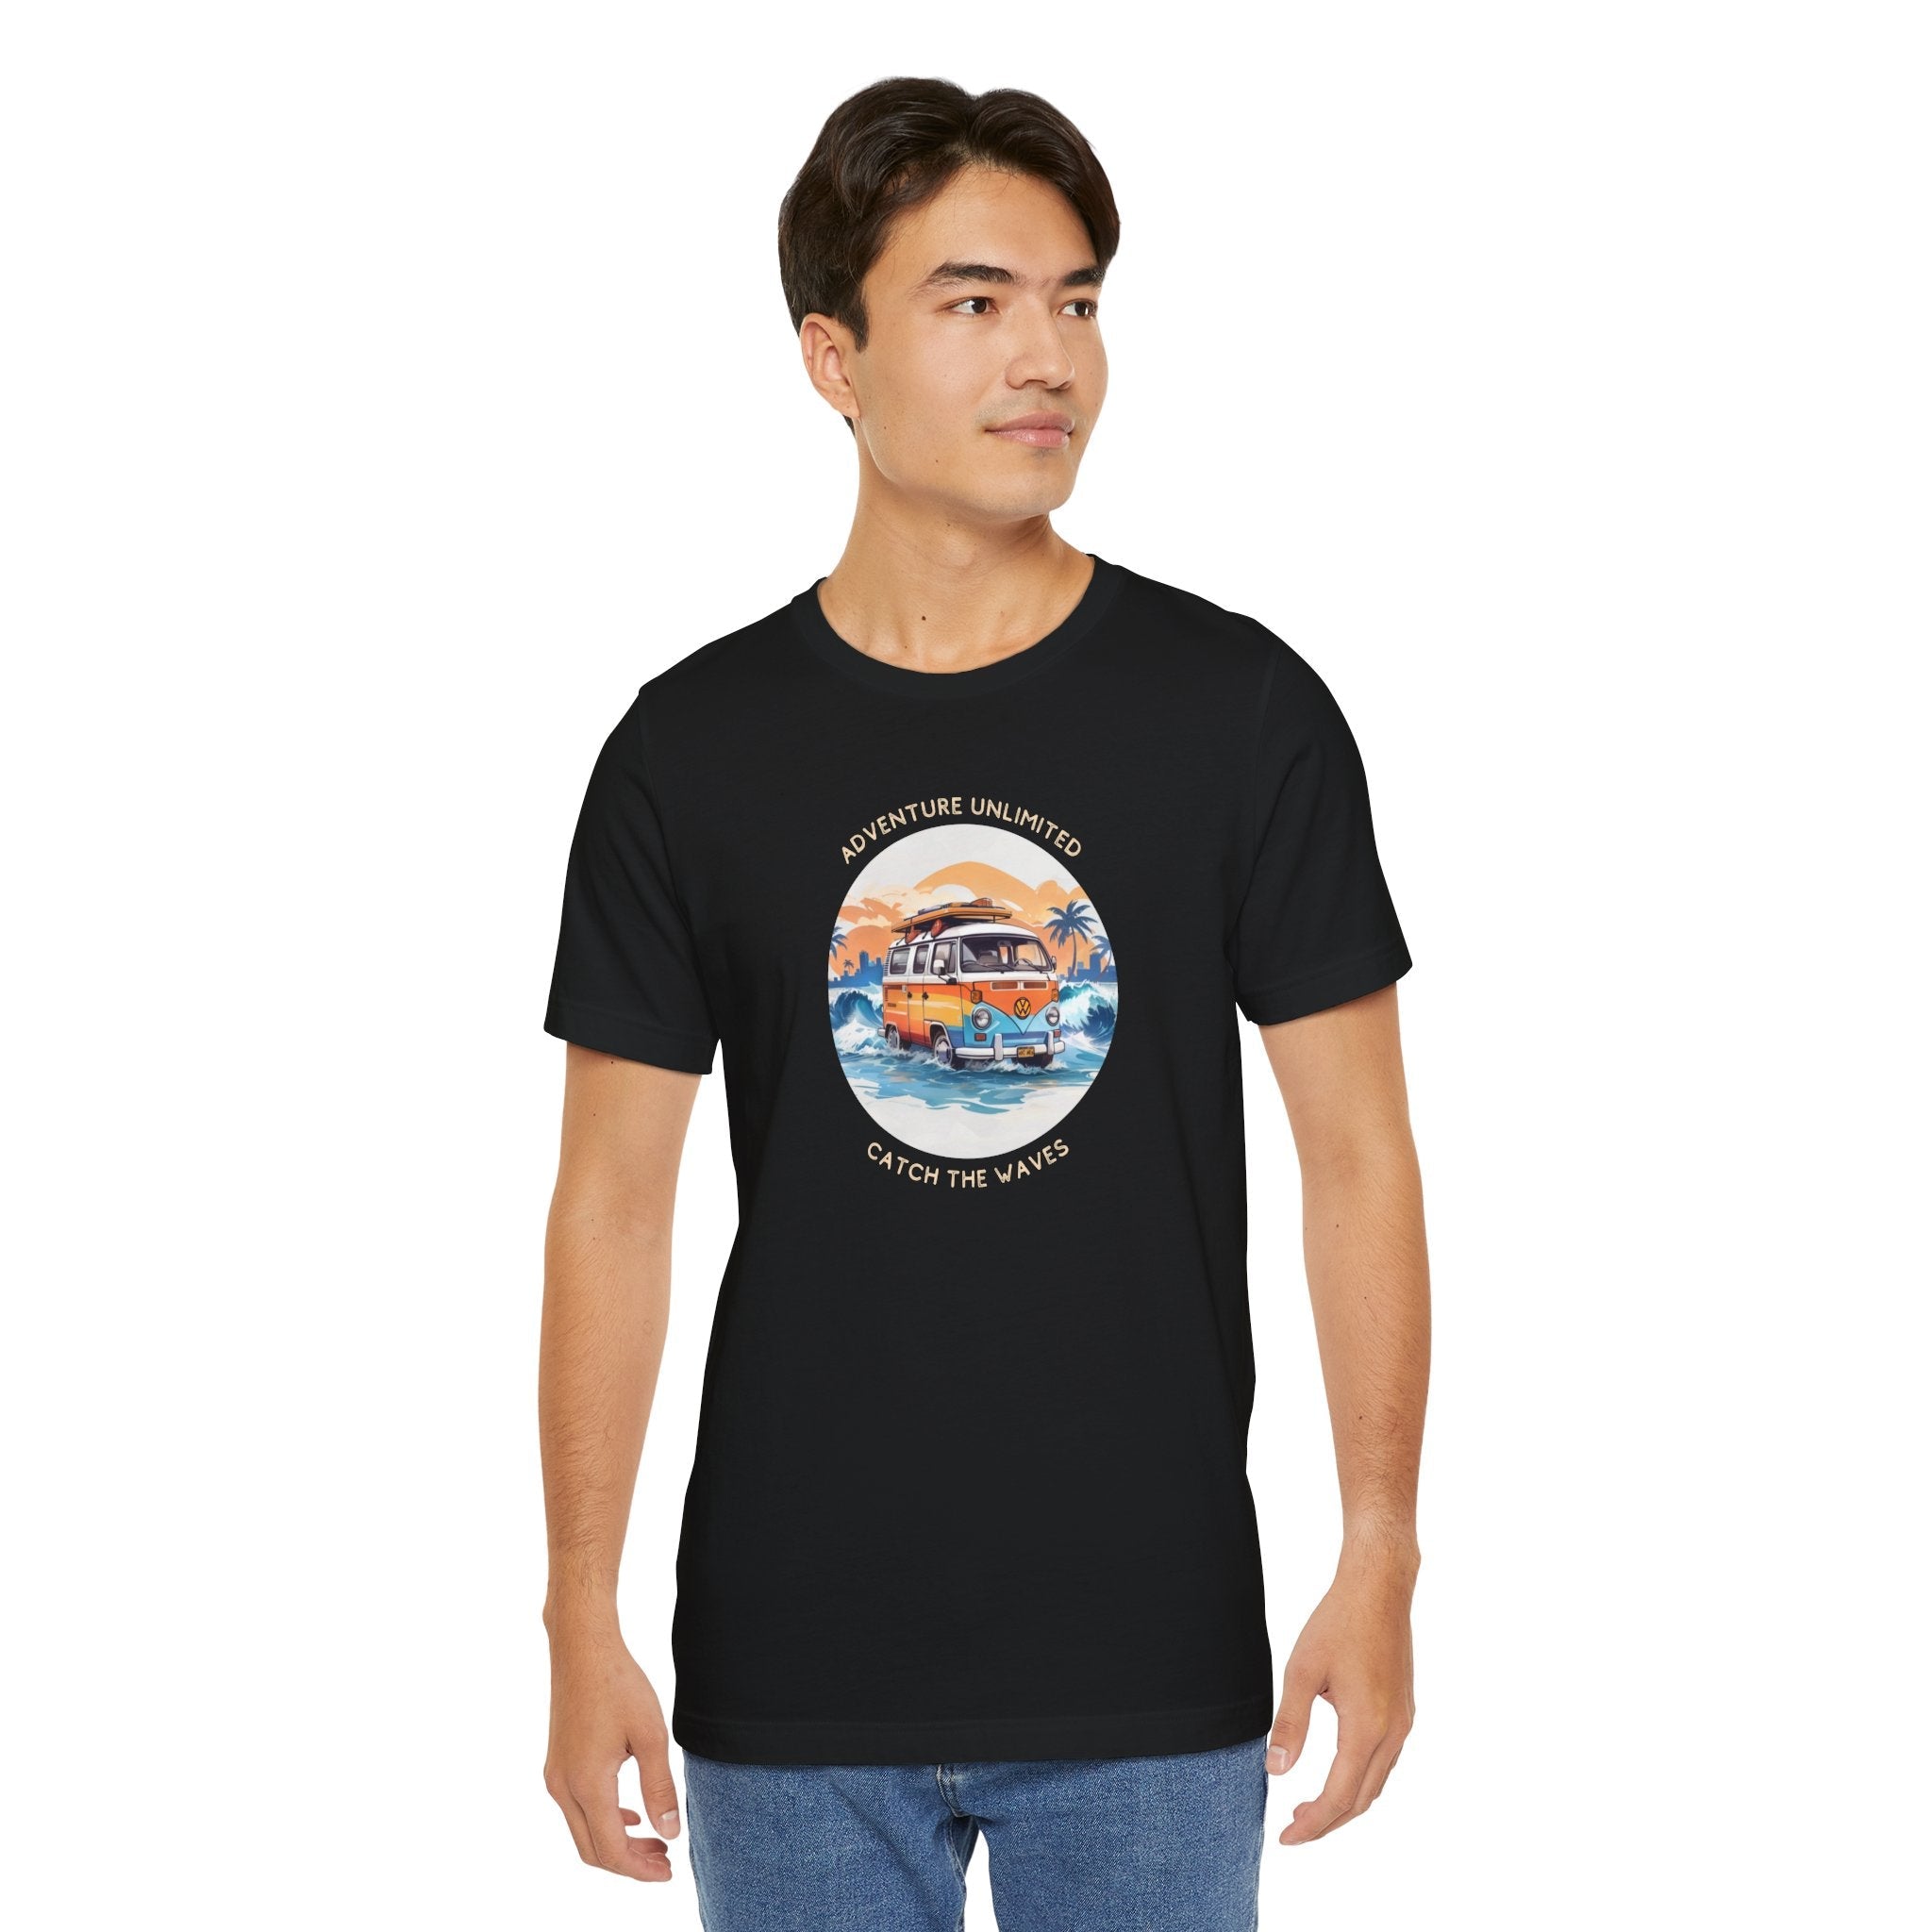 Adventure Unlimited unisex jersey tee with bus printed on black shirt